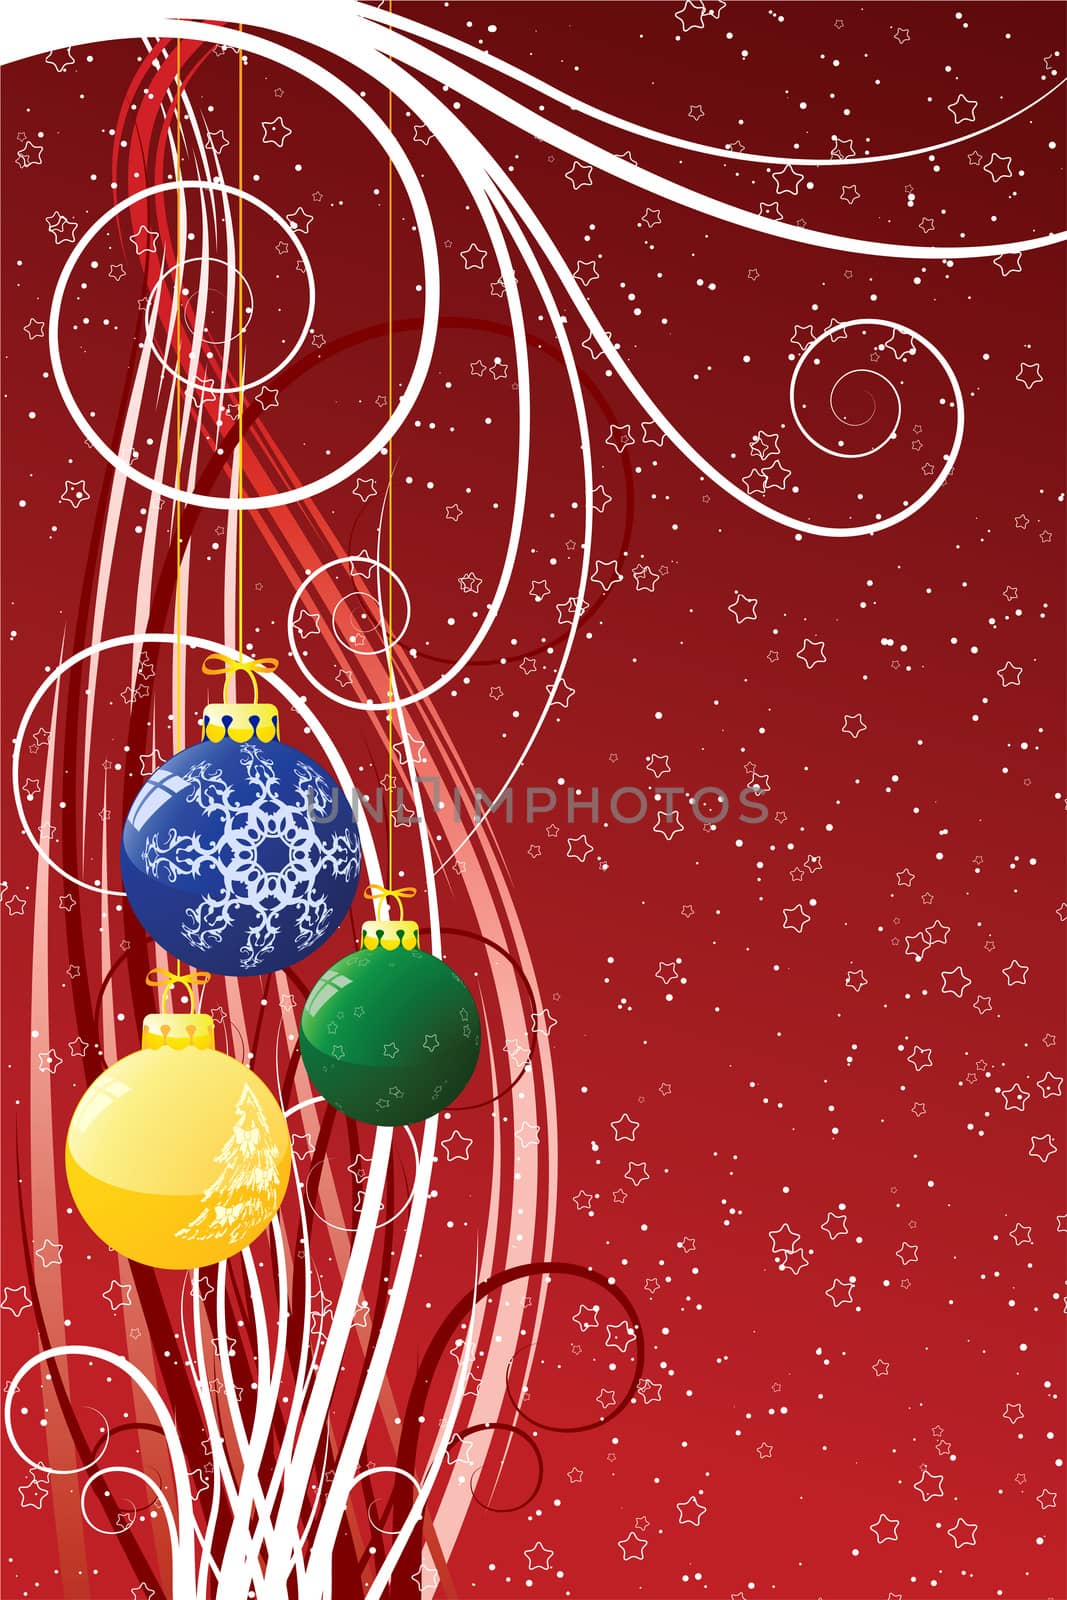 Abstract Christmas background with toys scrolls stars and snow